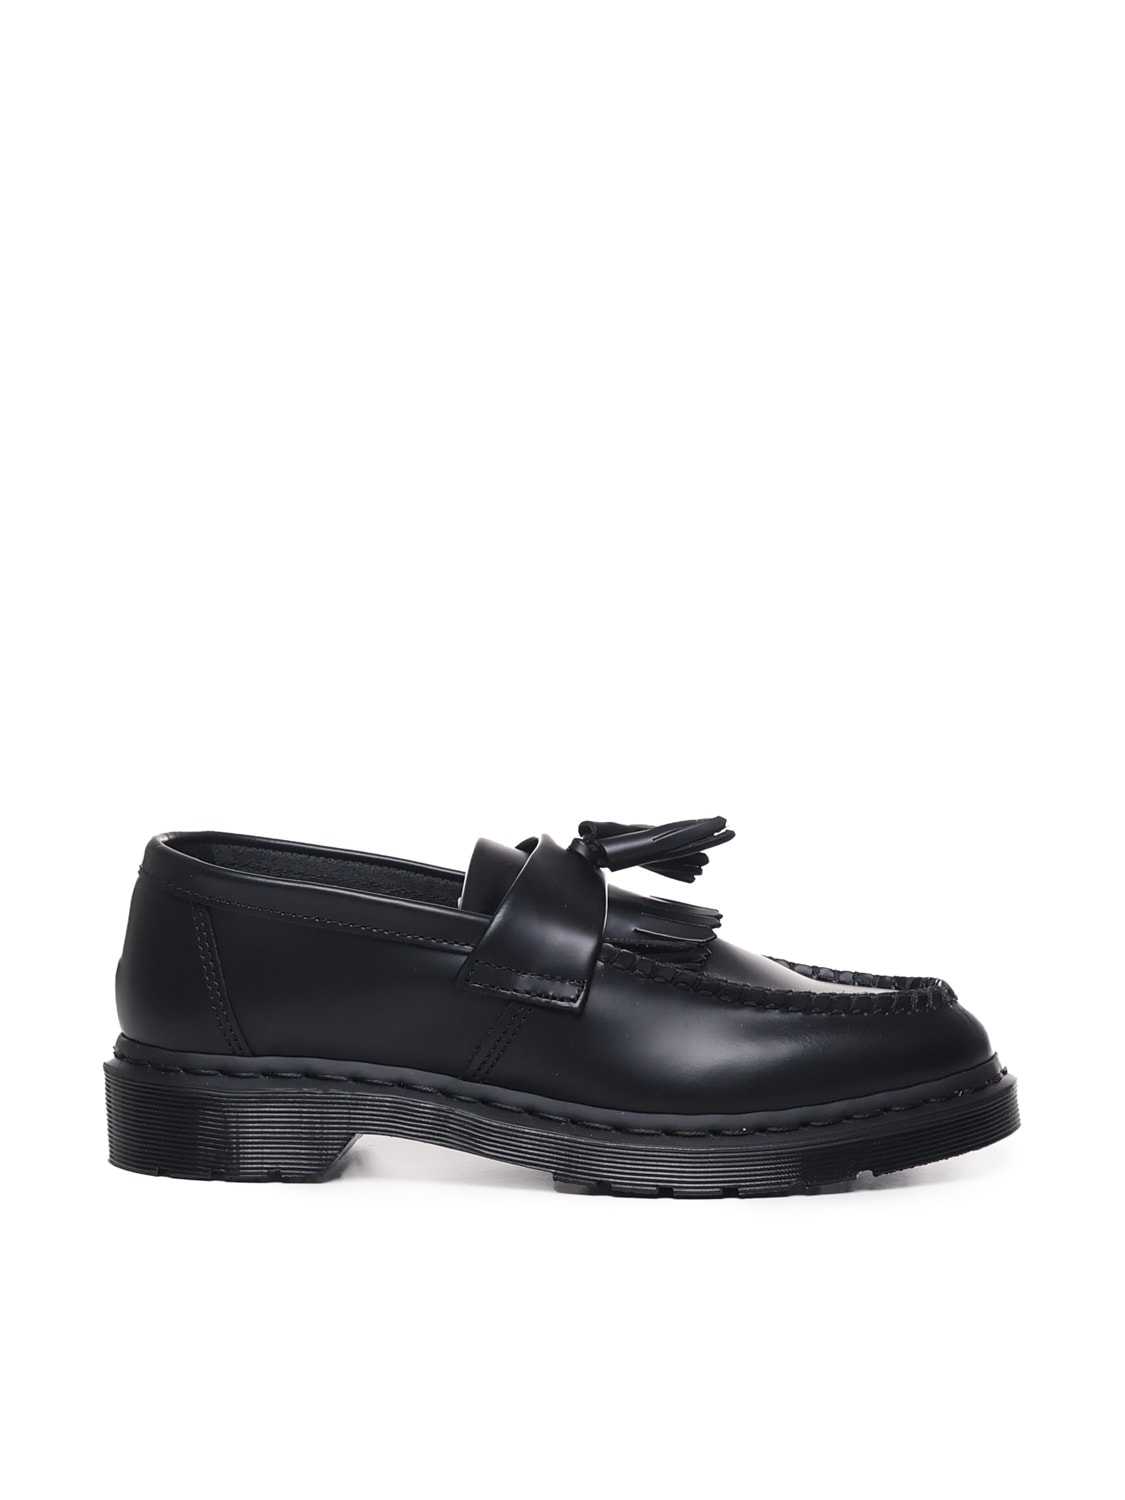 DR. MARTENS' ADRIAN MONO LOAFERS IN SMOOTH LEATHER